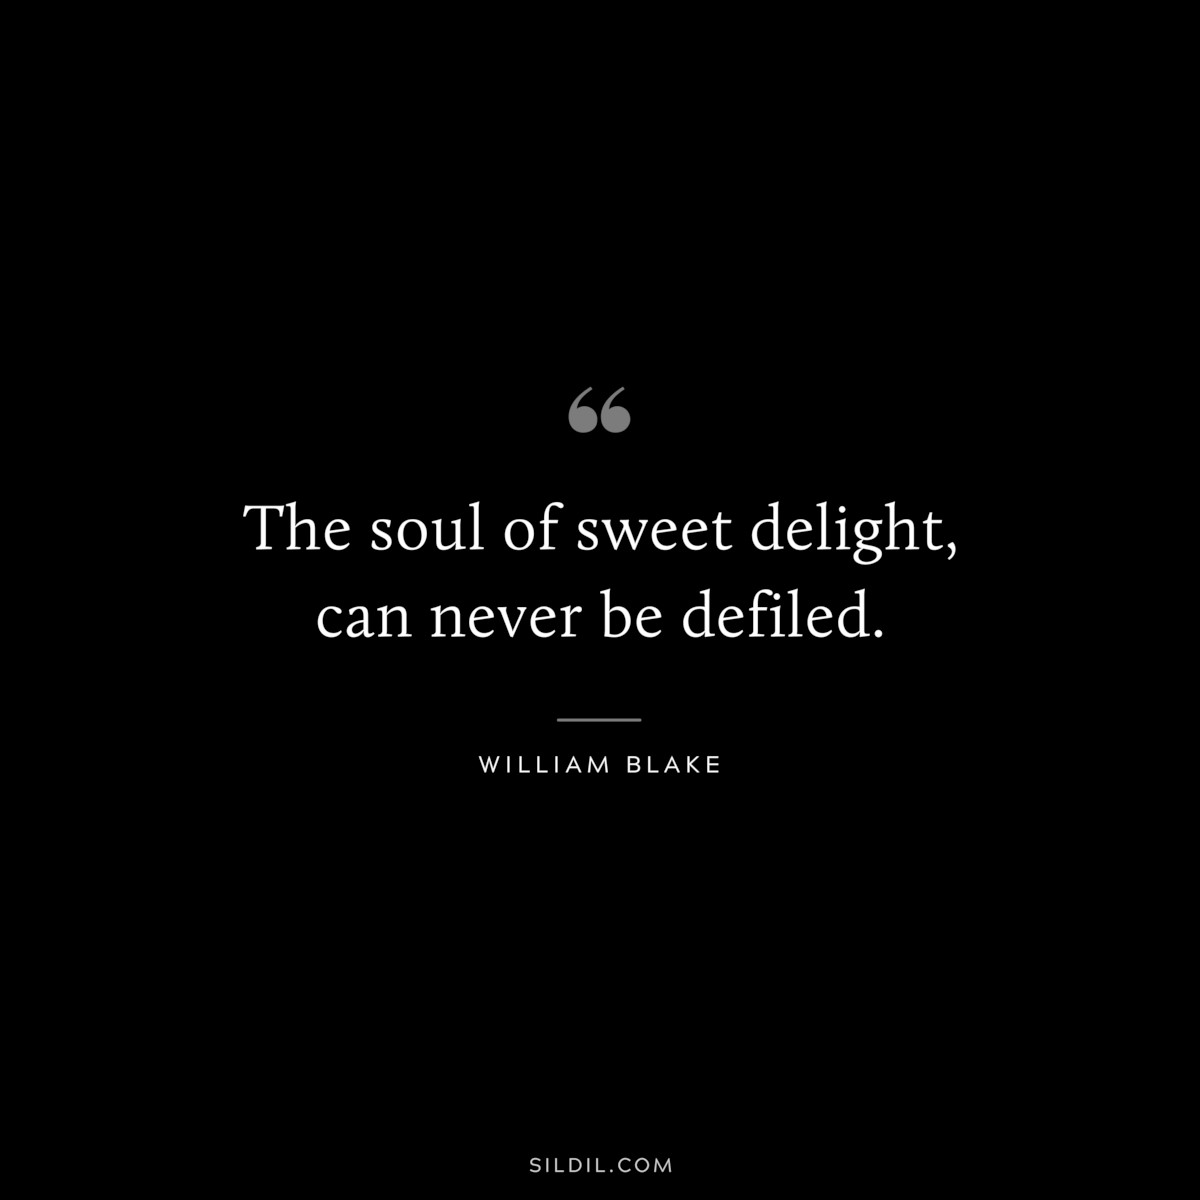 The soul of sweet delight, can never be defiled. ― William Blake